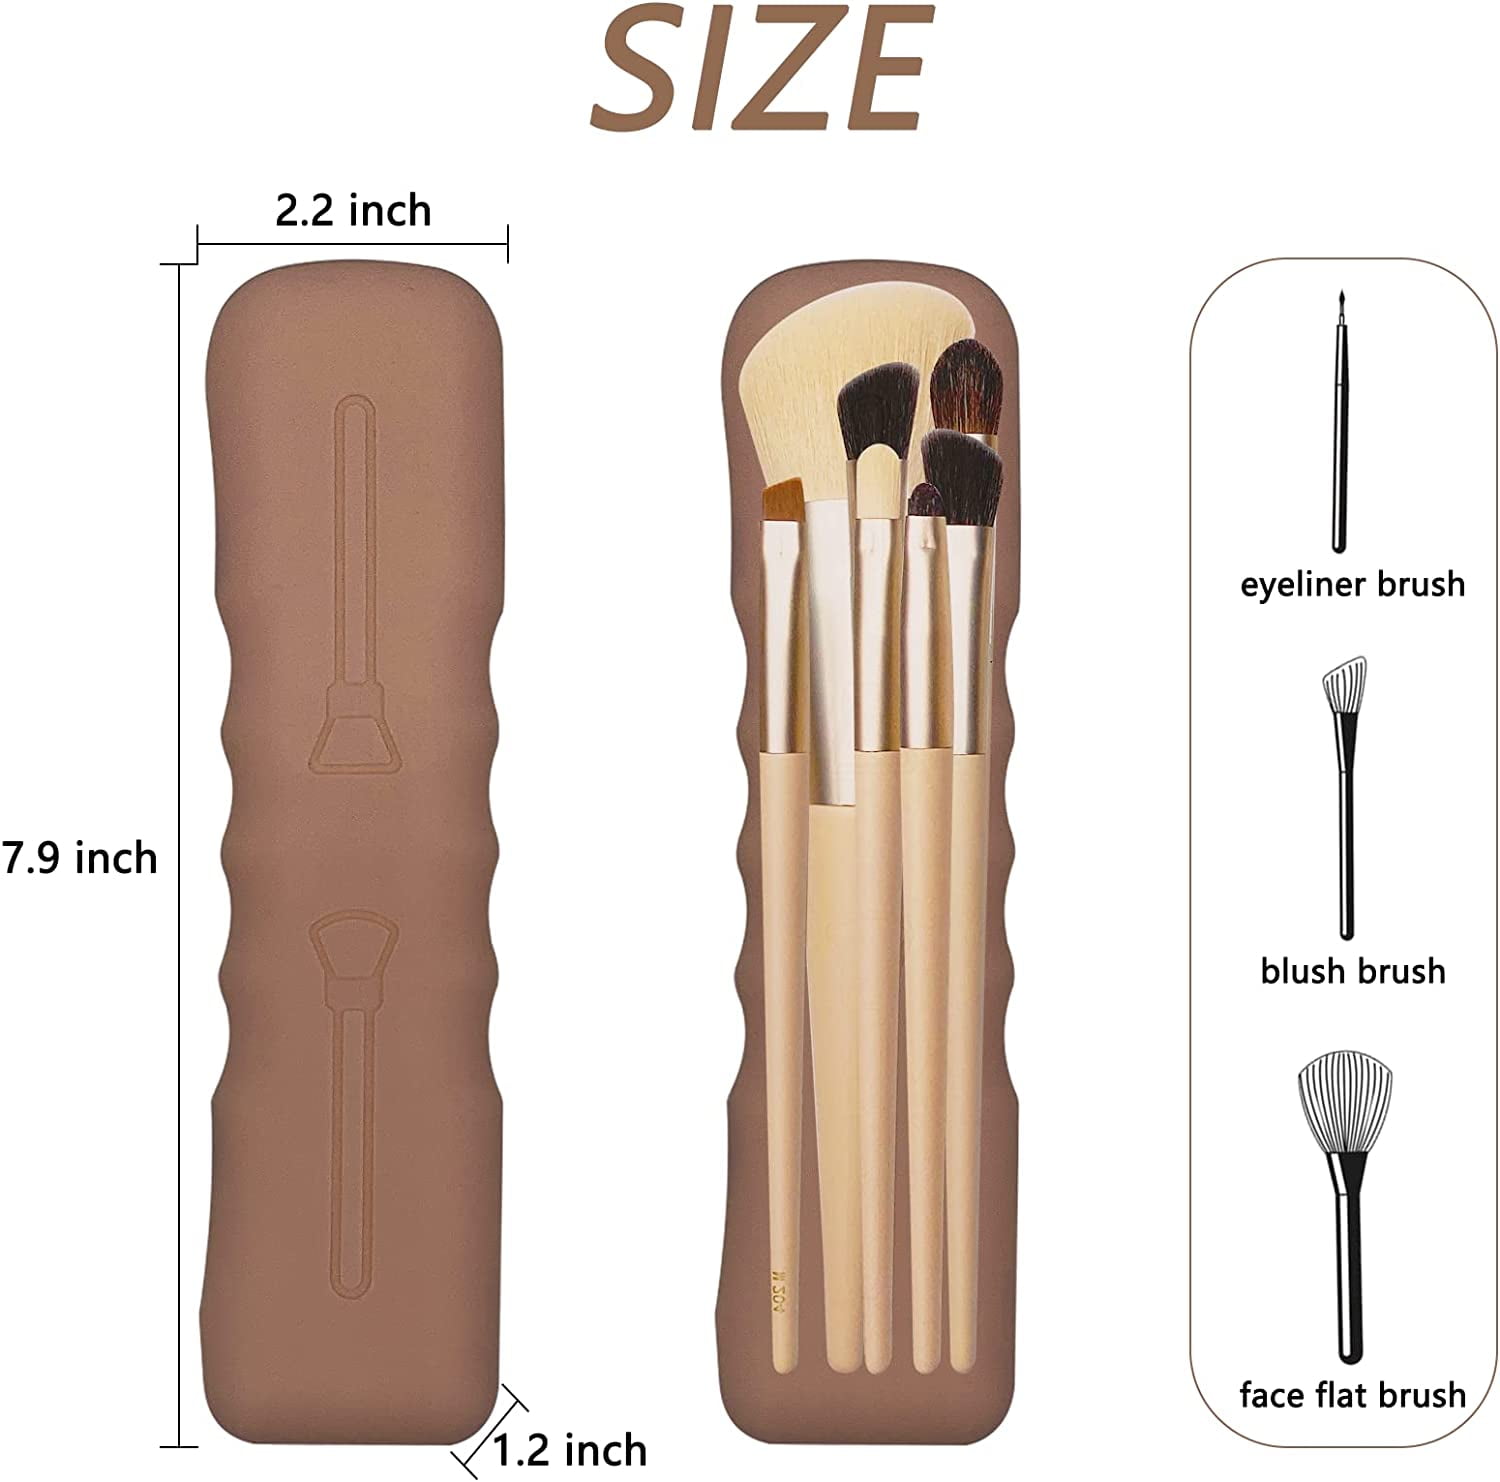  Silicone Travel Makeup Brush Holder Bag with Brush Cleaning  Mat, Portable Makeup Brush Organizer Bag with Magnetic Adsorption, Soft &  Sleek Silicone Cosmetic Bag (Khaki) : Beauty & Personal Care